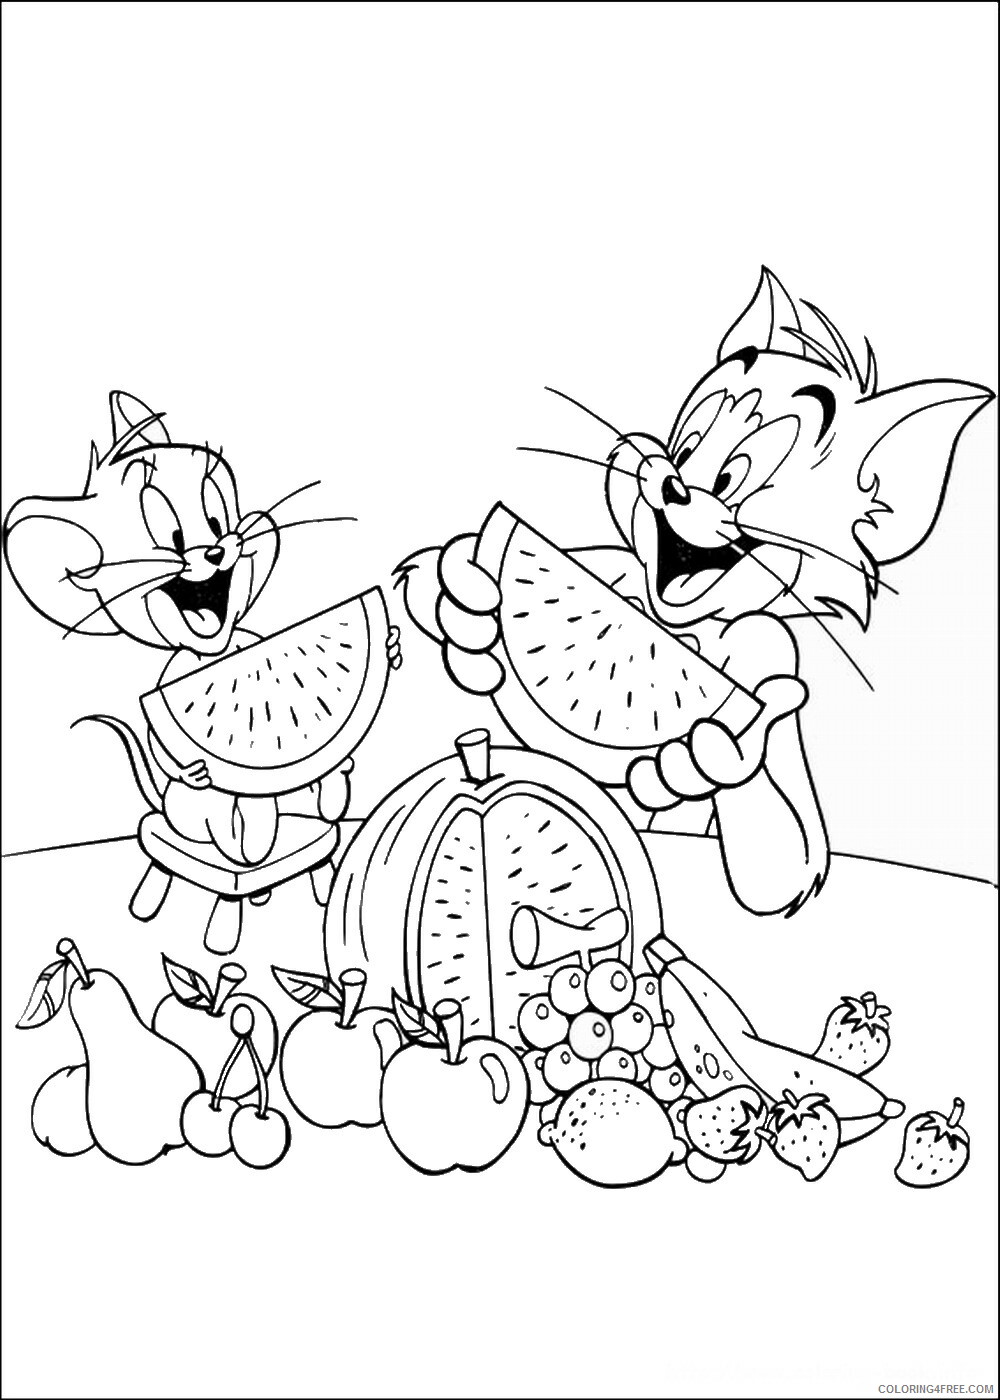 Tom and Jerry Coloring Pages TV Film tom_jerry_cl_04 Printable 2020 10134 Coloring4free